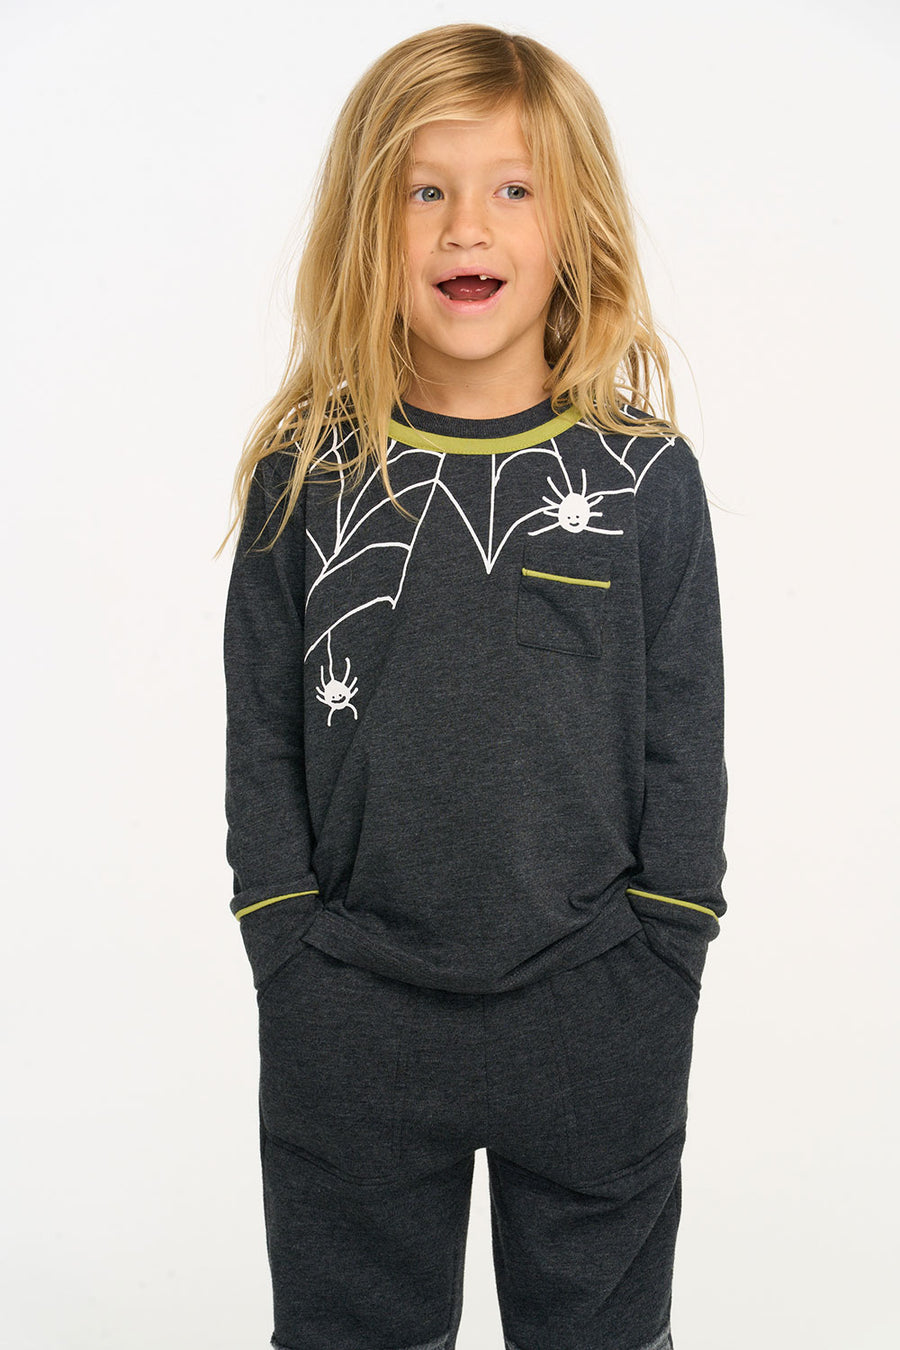 Spider Web Long Sleeve Top BOYS chaserbrand